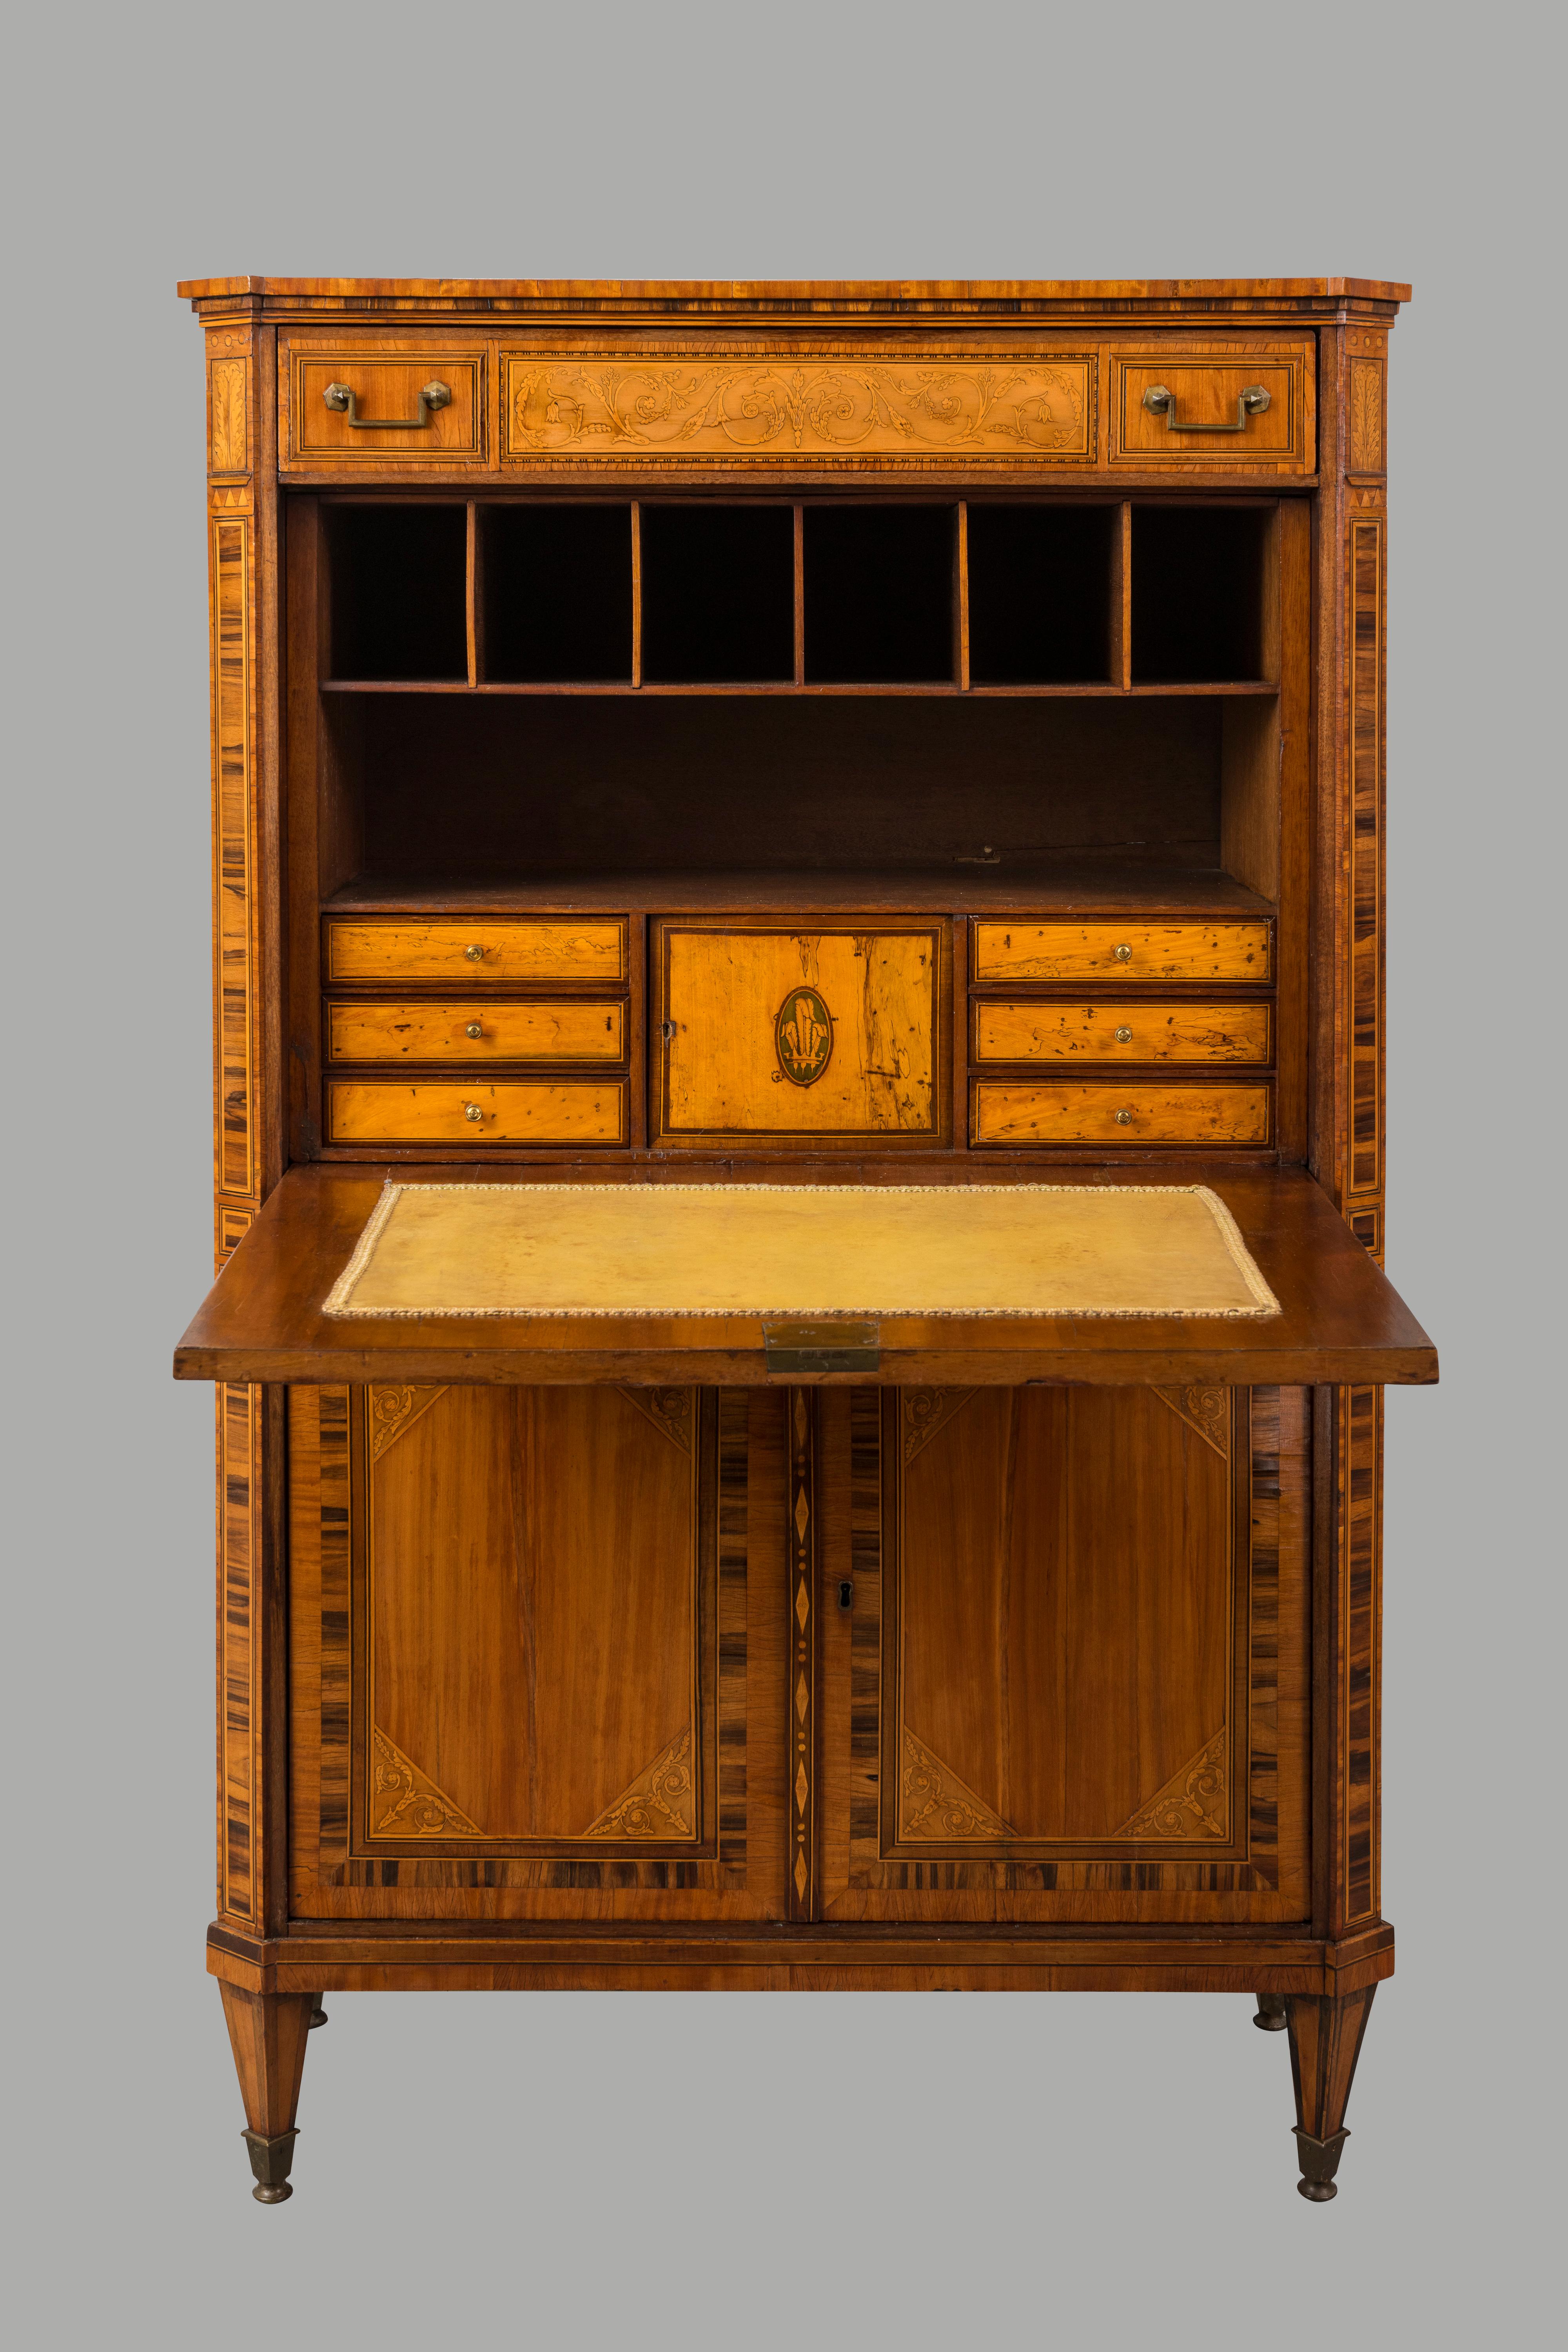 A fine Dutch neoclassical inlaid satinwood secretaire abattant on square tapered legs with inlays of rosewood, tulipwood and boxwood, the front opening to reveal a counterweighted writing surface  lined with pale green leather. The interior is